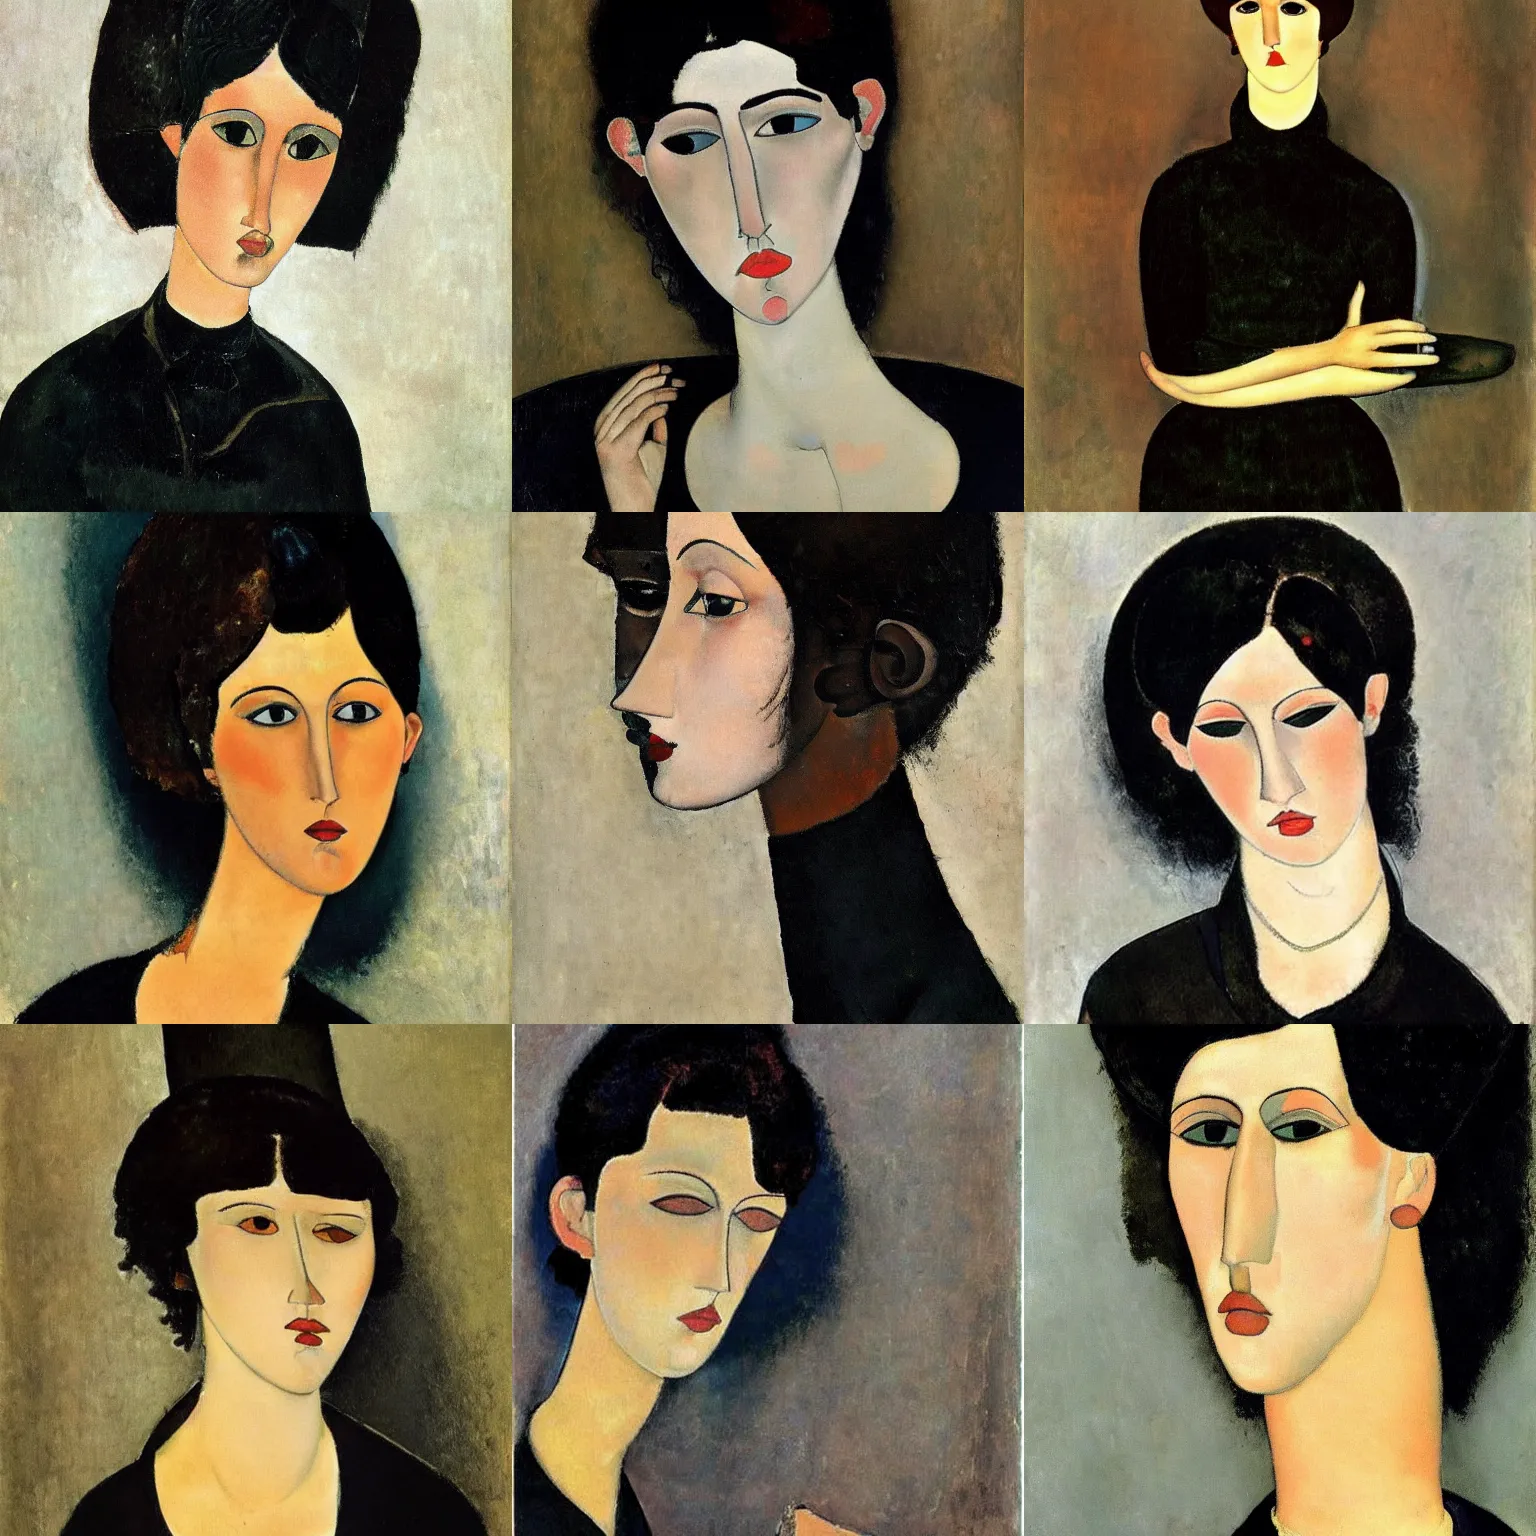 Prompt: A goth painted by Amedeo Modigliani. Her hair is dark brown and cut into a short, messy pixie cut. She has a slightly rounded face, with a pointed chin, large entirely-black eyes, and a small nose. She is wearing a black tank top, a black leather jacket, a black knee-length skirt, a black choker, and black leather boots.